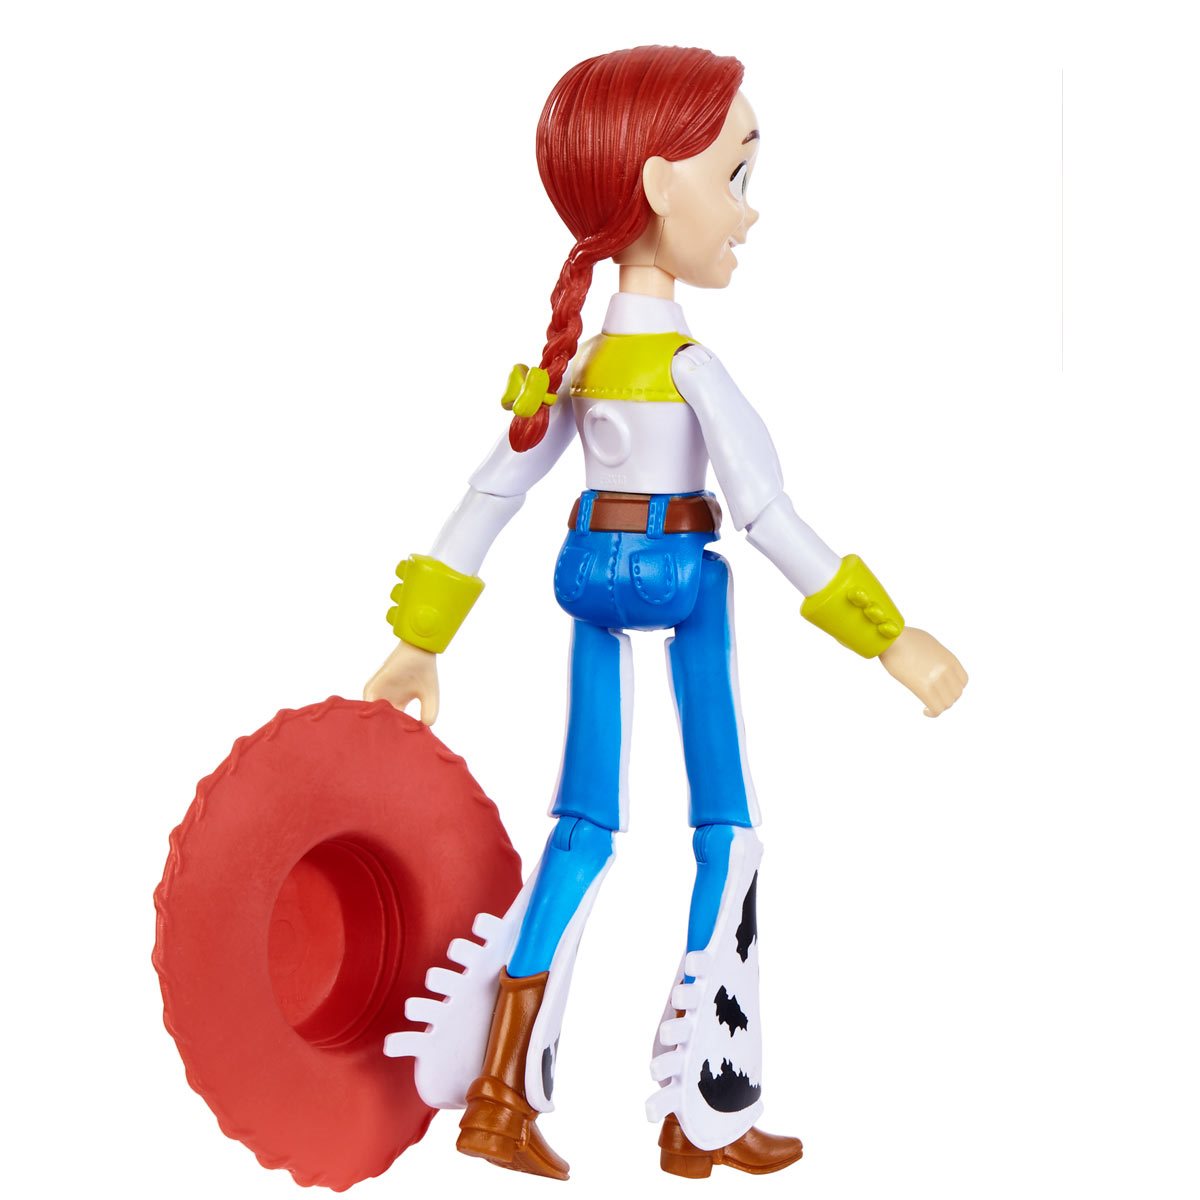 Disney Action Figure - Jessie - Toy Story 4-Action-F2567